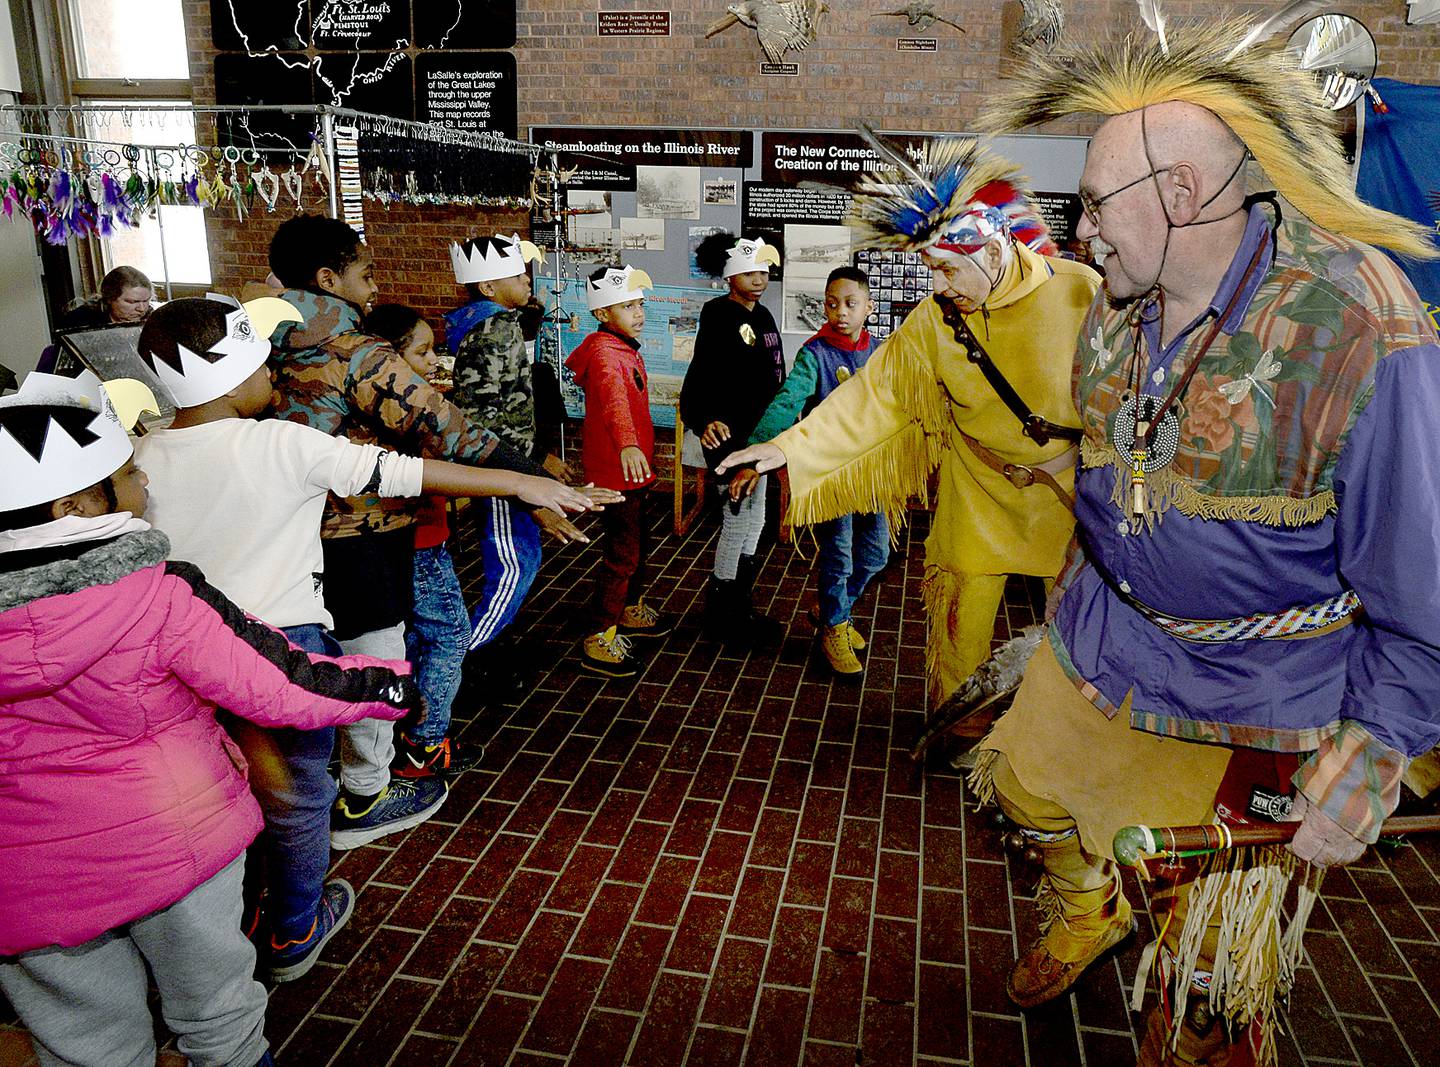 Scouts join in a Native American dance with members of the Kickapoo tribe Saturday, Jan. 28, 2023, at the Illinois Waterway Visitors Center as part of the Eagle Watch Weekend.